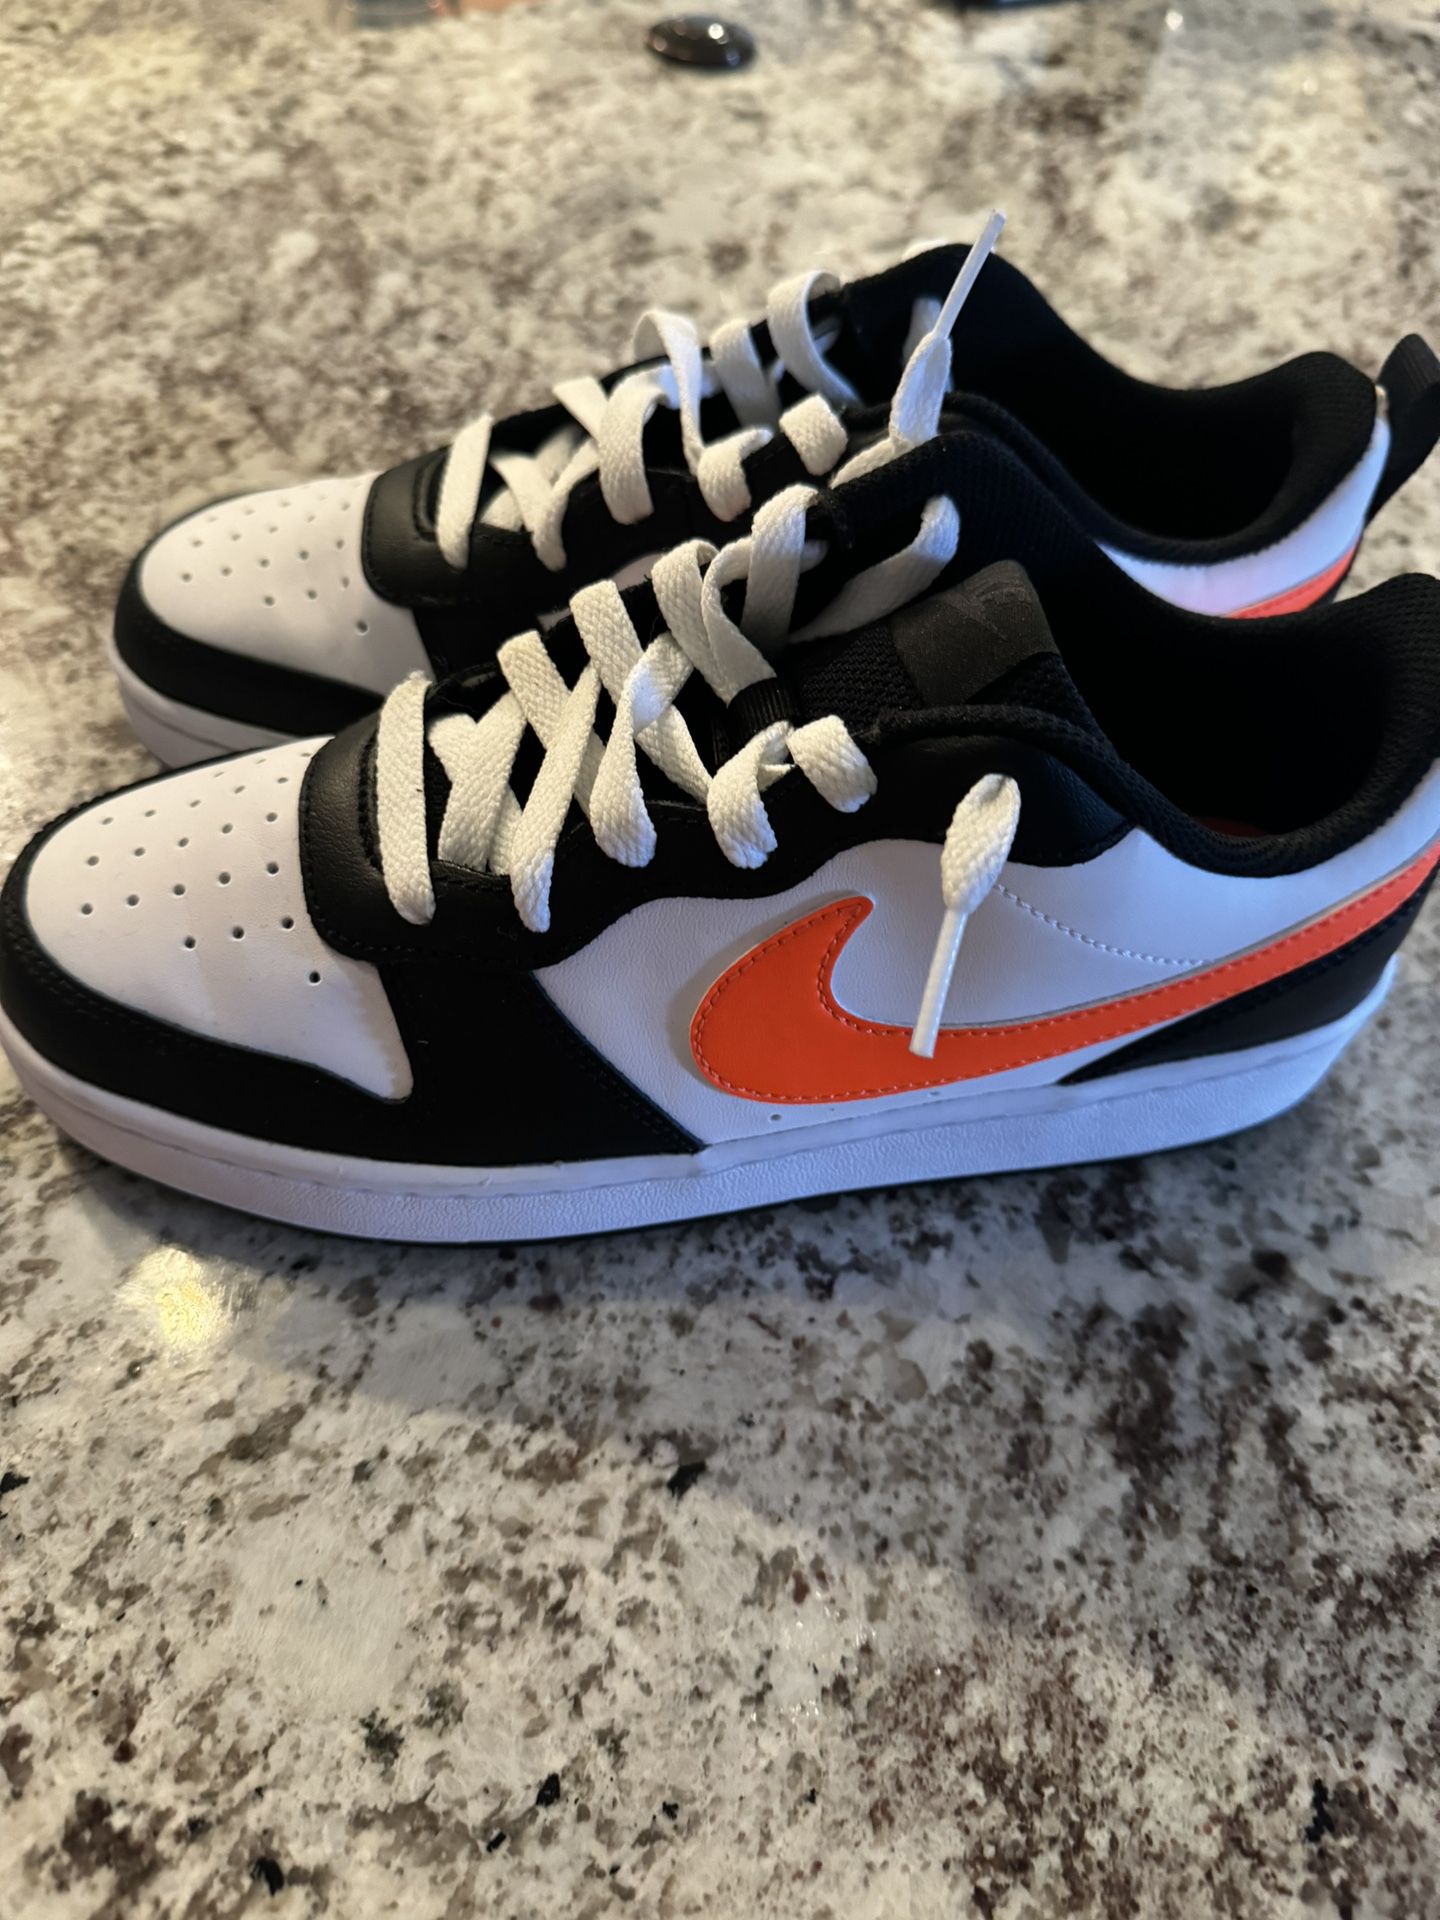 Youth 6.5 Nikes Shoes 